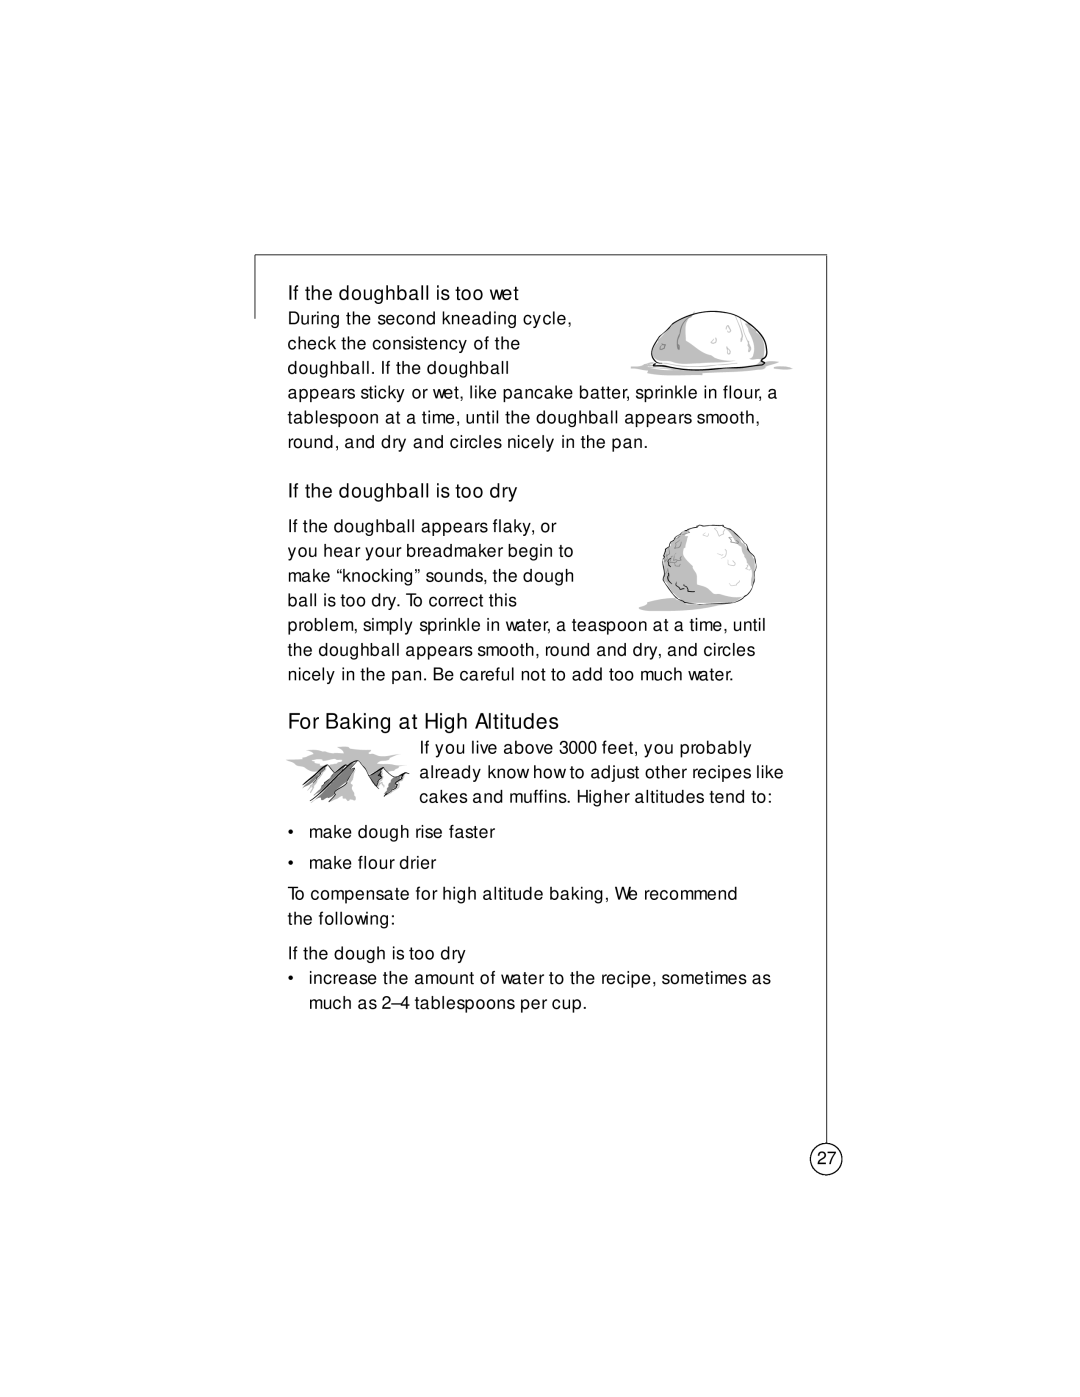 Oster Bread Maker user manual For Baking at High Altitudes, If the doughball is too dry 